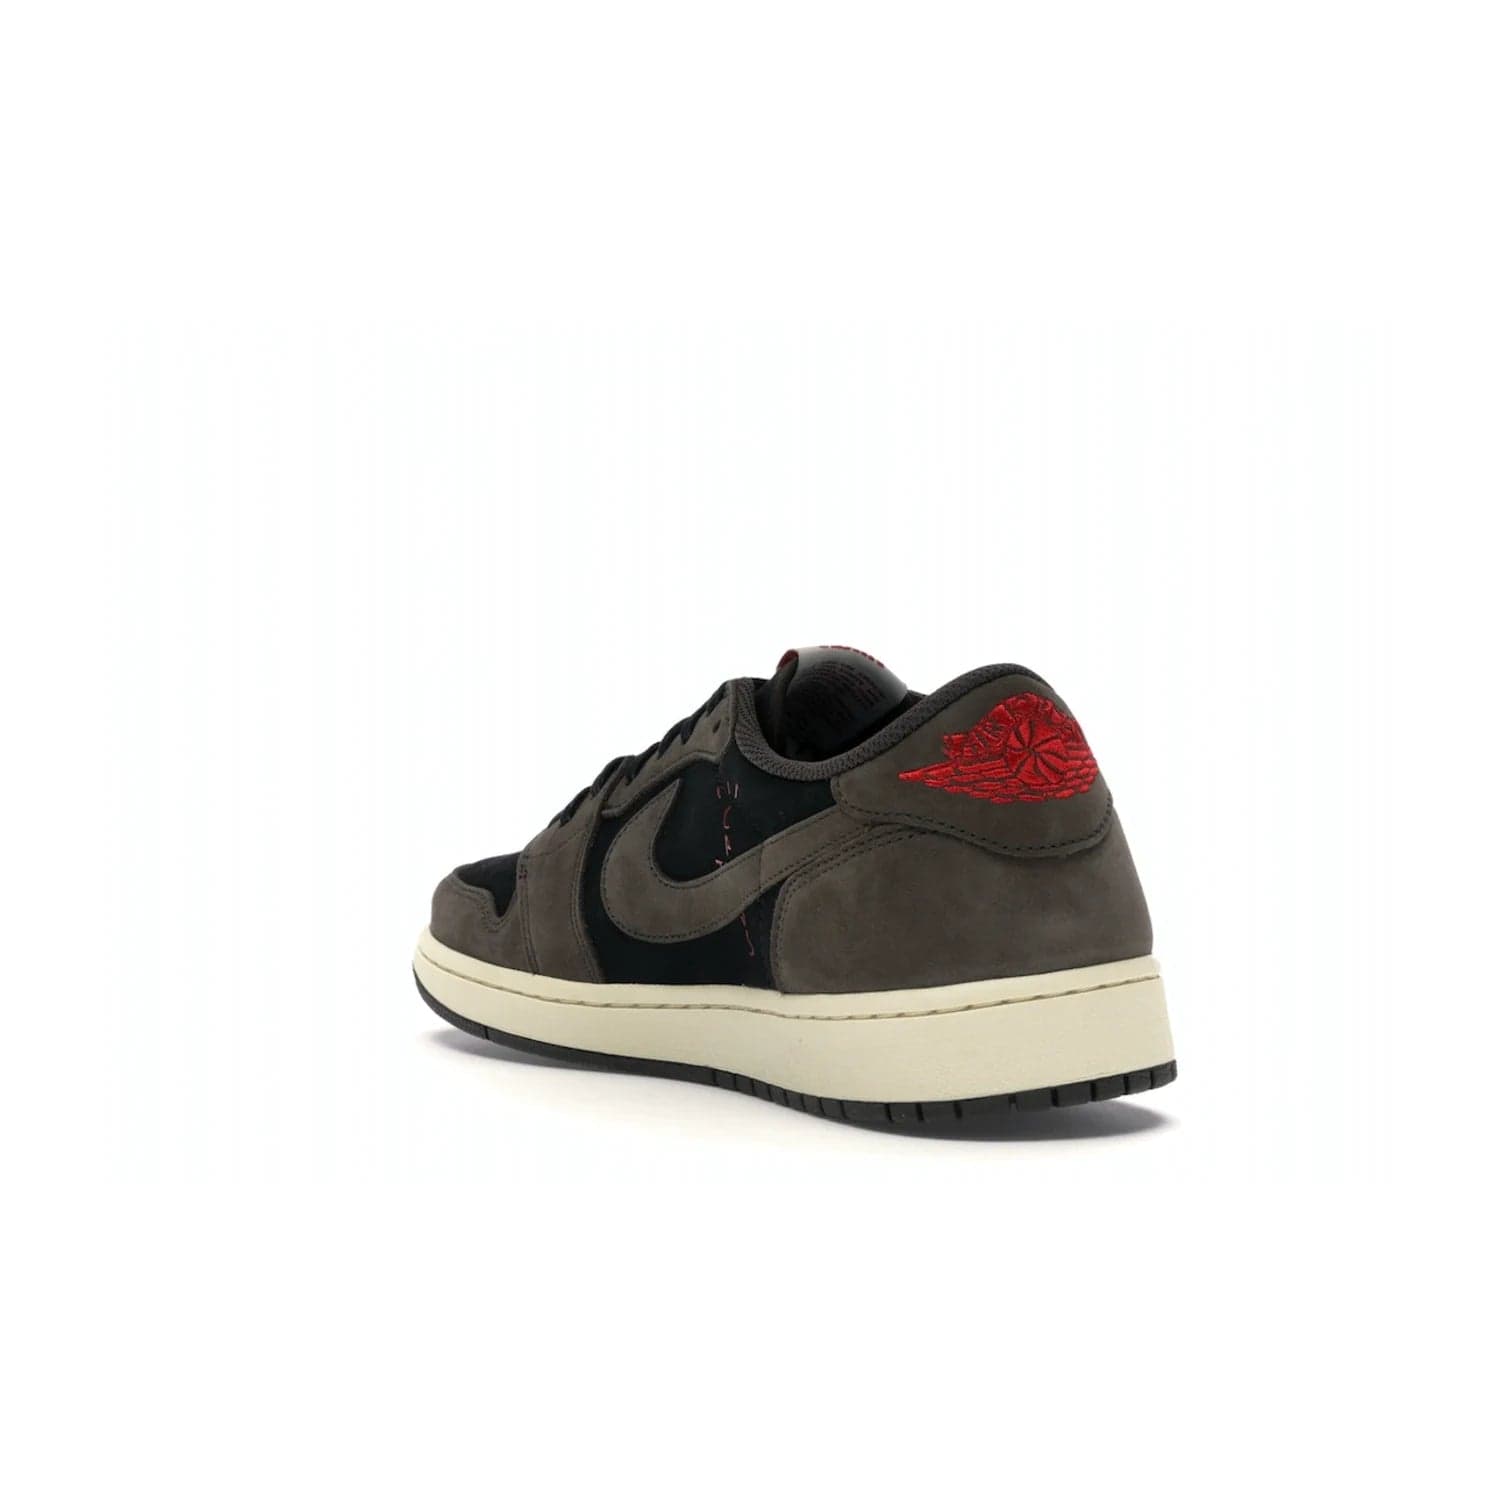 Jordan 1 Retro Low OG SP Travis Scott - Image 25 - Only at www.BallersClubKickz.com - The Air Jordan 1 Low Travis Scott combines modern and classic design elements for a stylish look. It features a black upper with dark brown overlays, red accents, sail midsole, and dark brown outsole. Signature touches include a backwards Swoosh logo and “Cactus Jack” inscriptions. Released in July 2019.